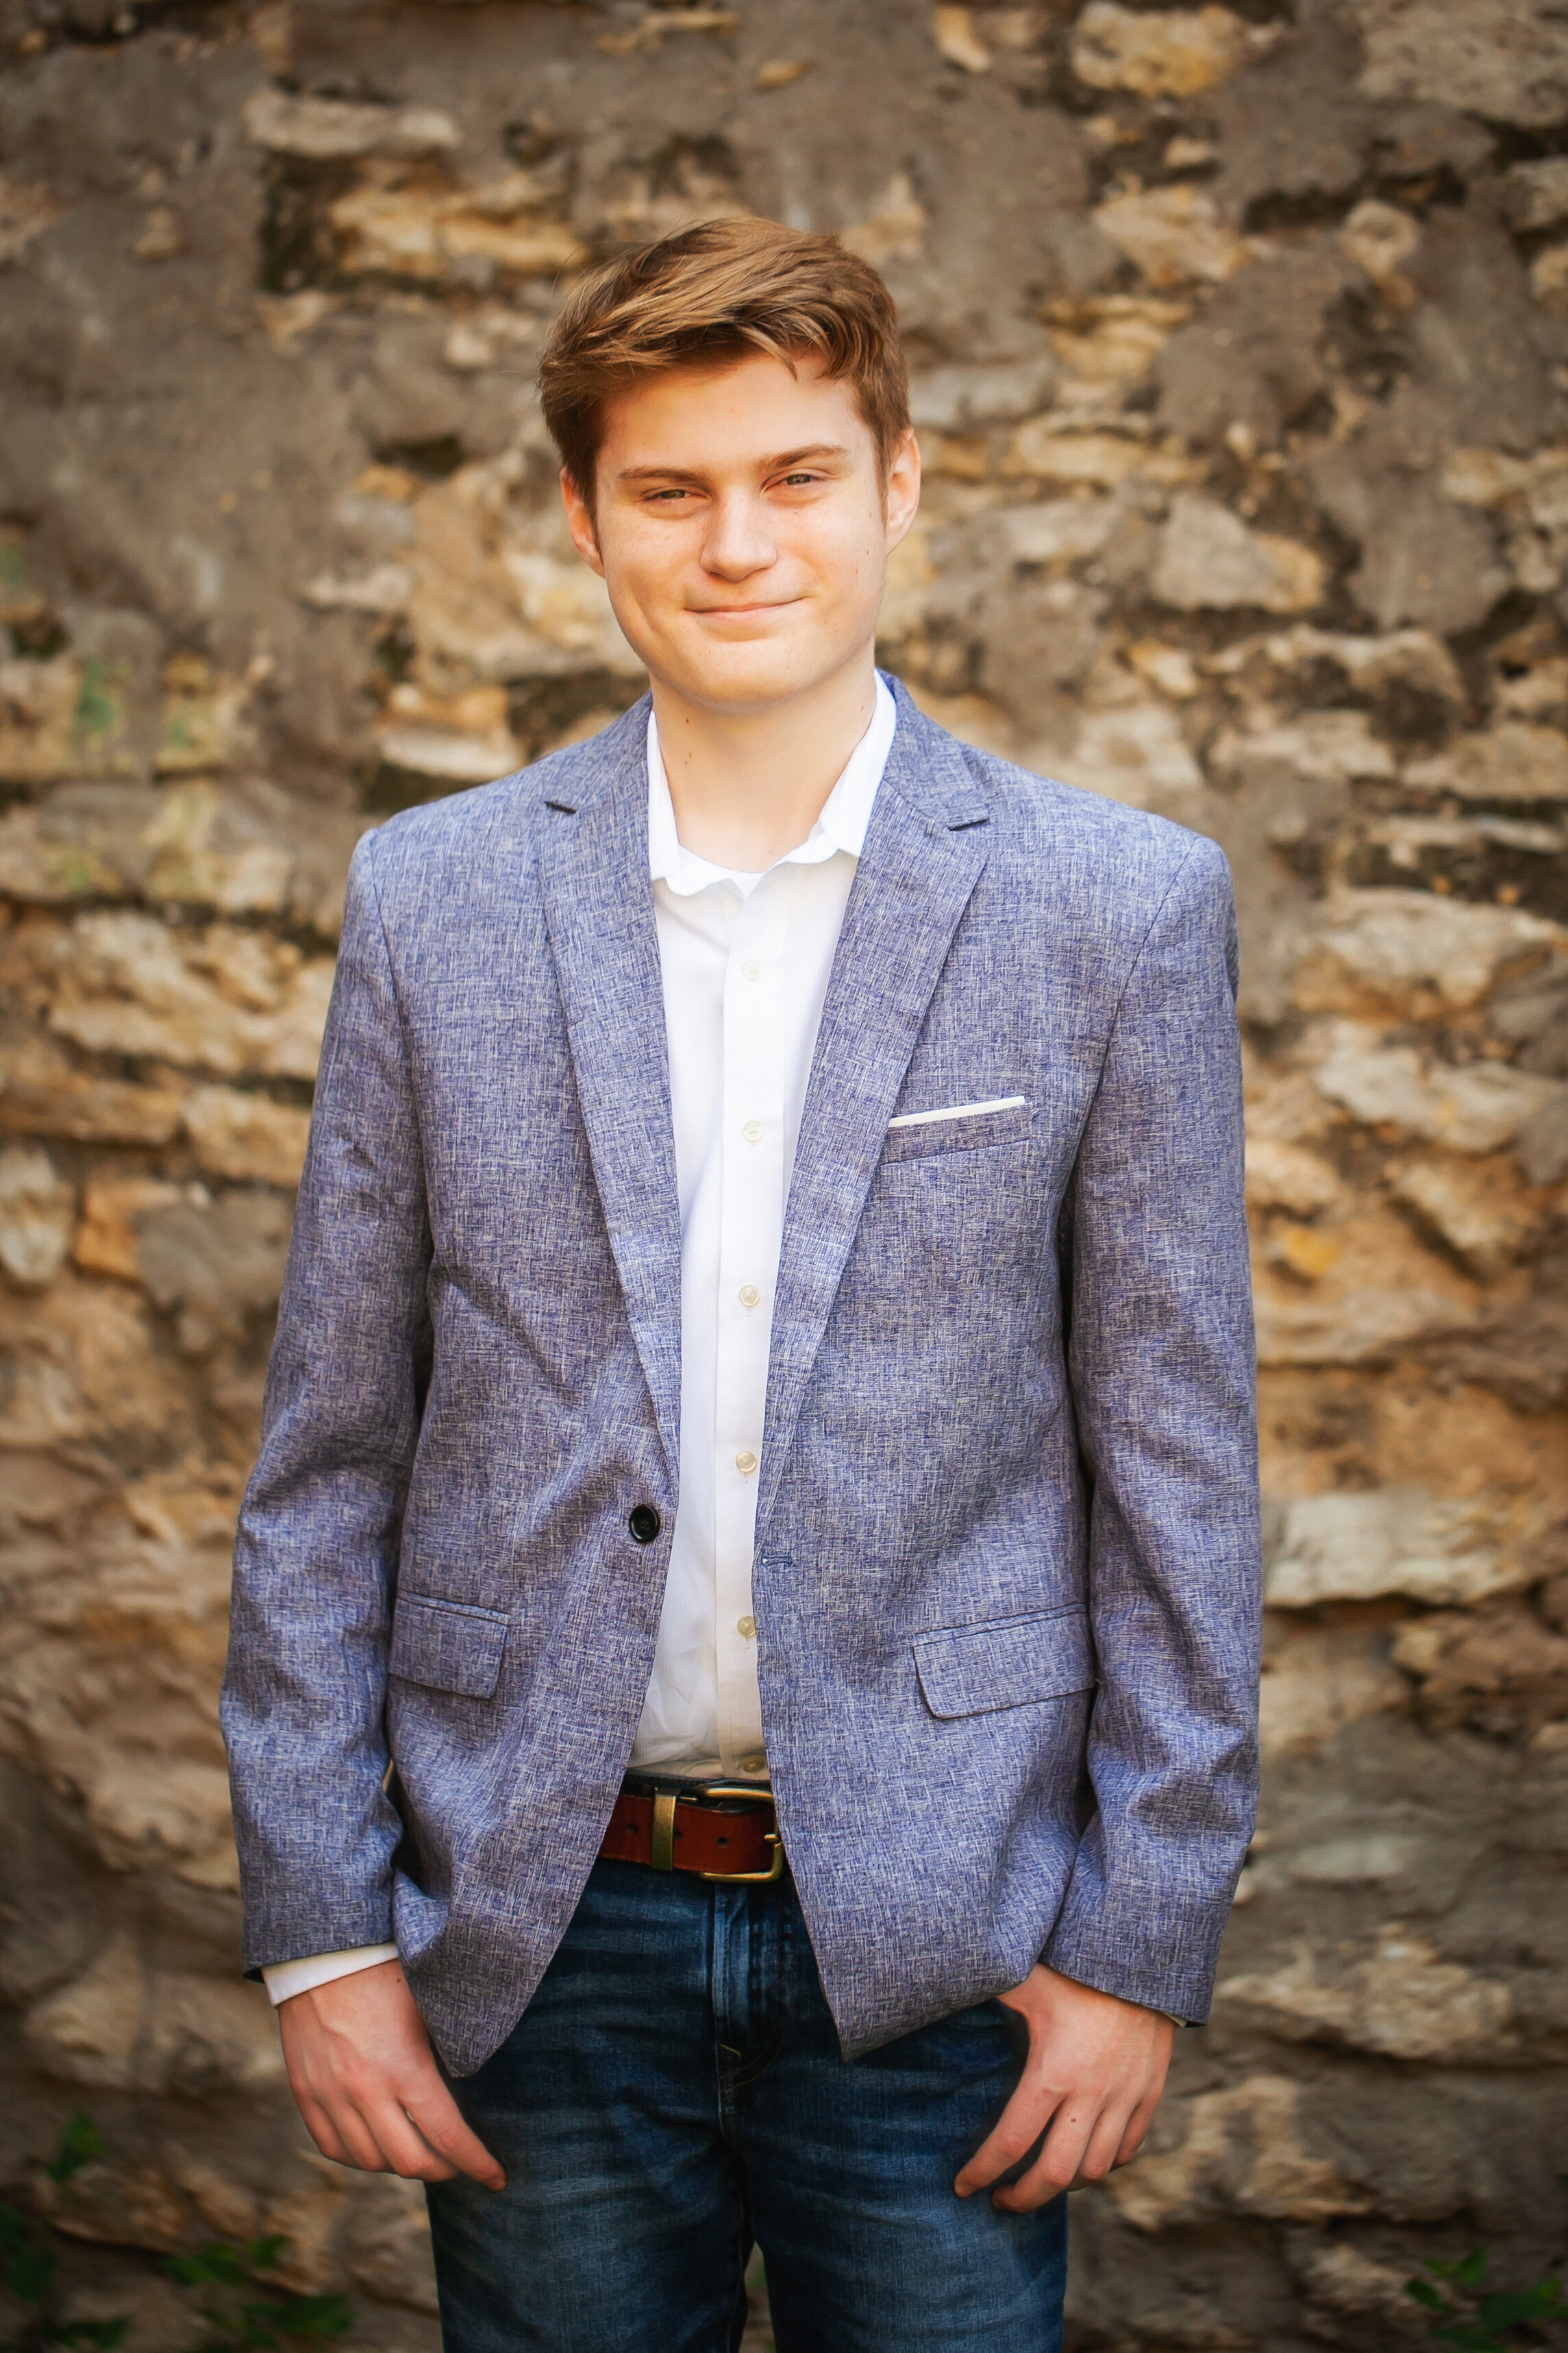 senior-guy-suit-jacket-sportcoat-formal-business-casual-attire-senior-style-photographer-fort-worth-weatherford